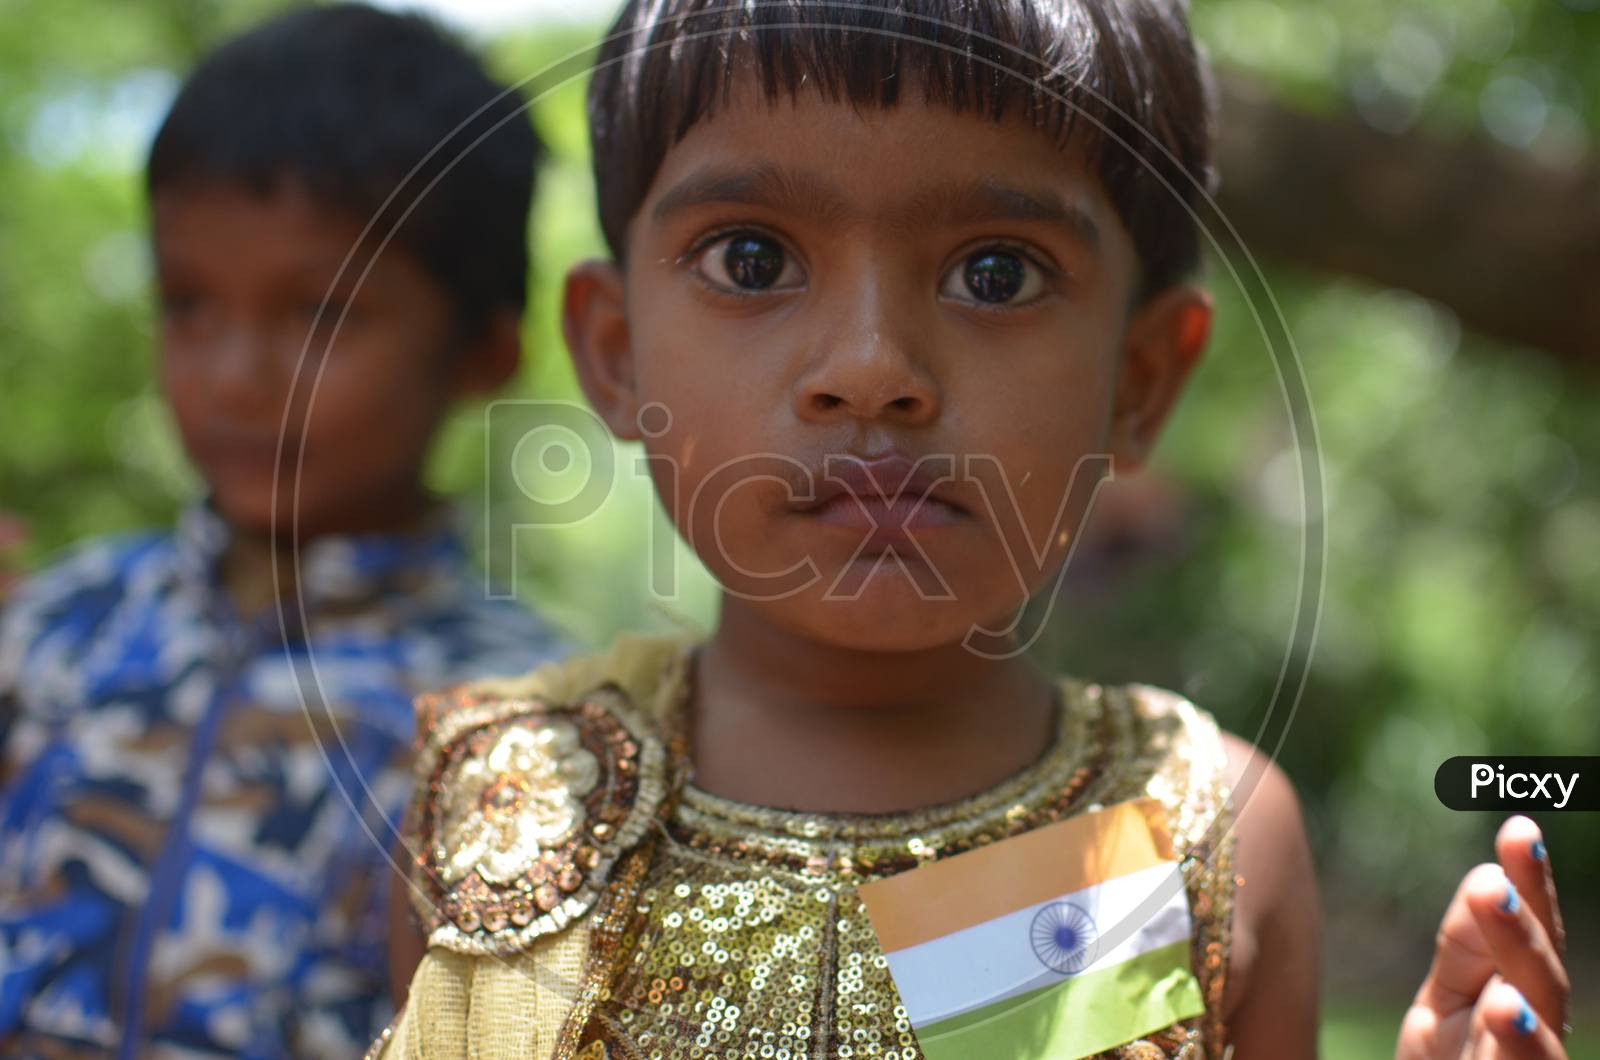 Girl child smiling face / Indian Children Smiling Faces / Childrens Wearing Indian Flag on Indipendence Day